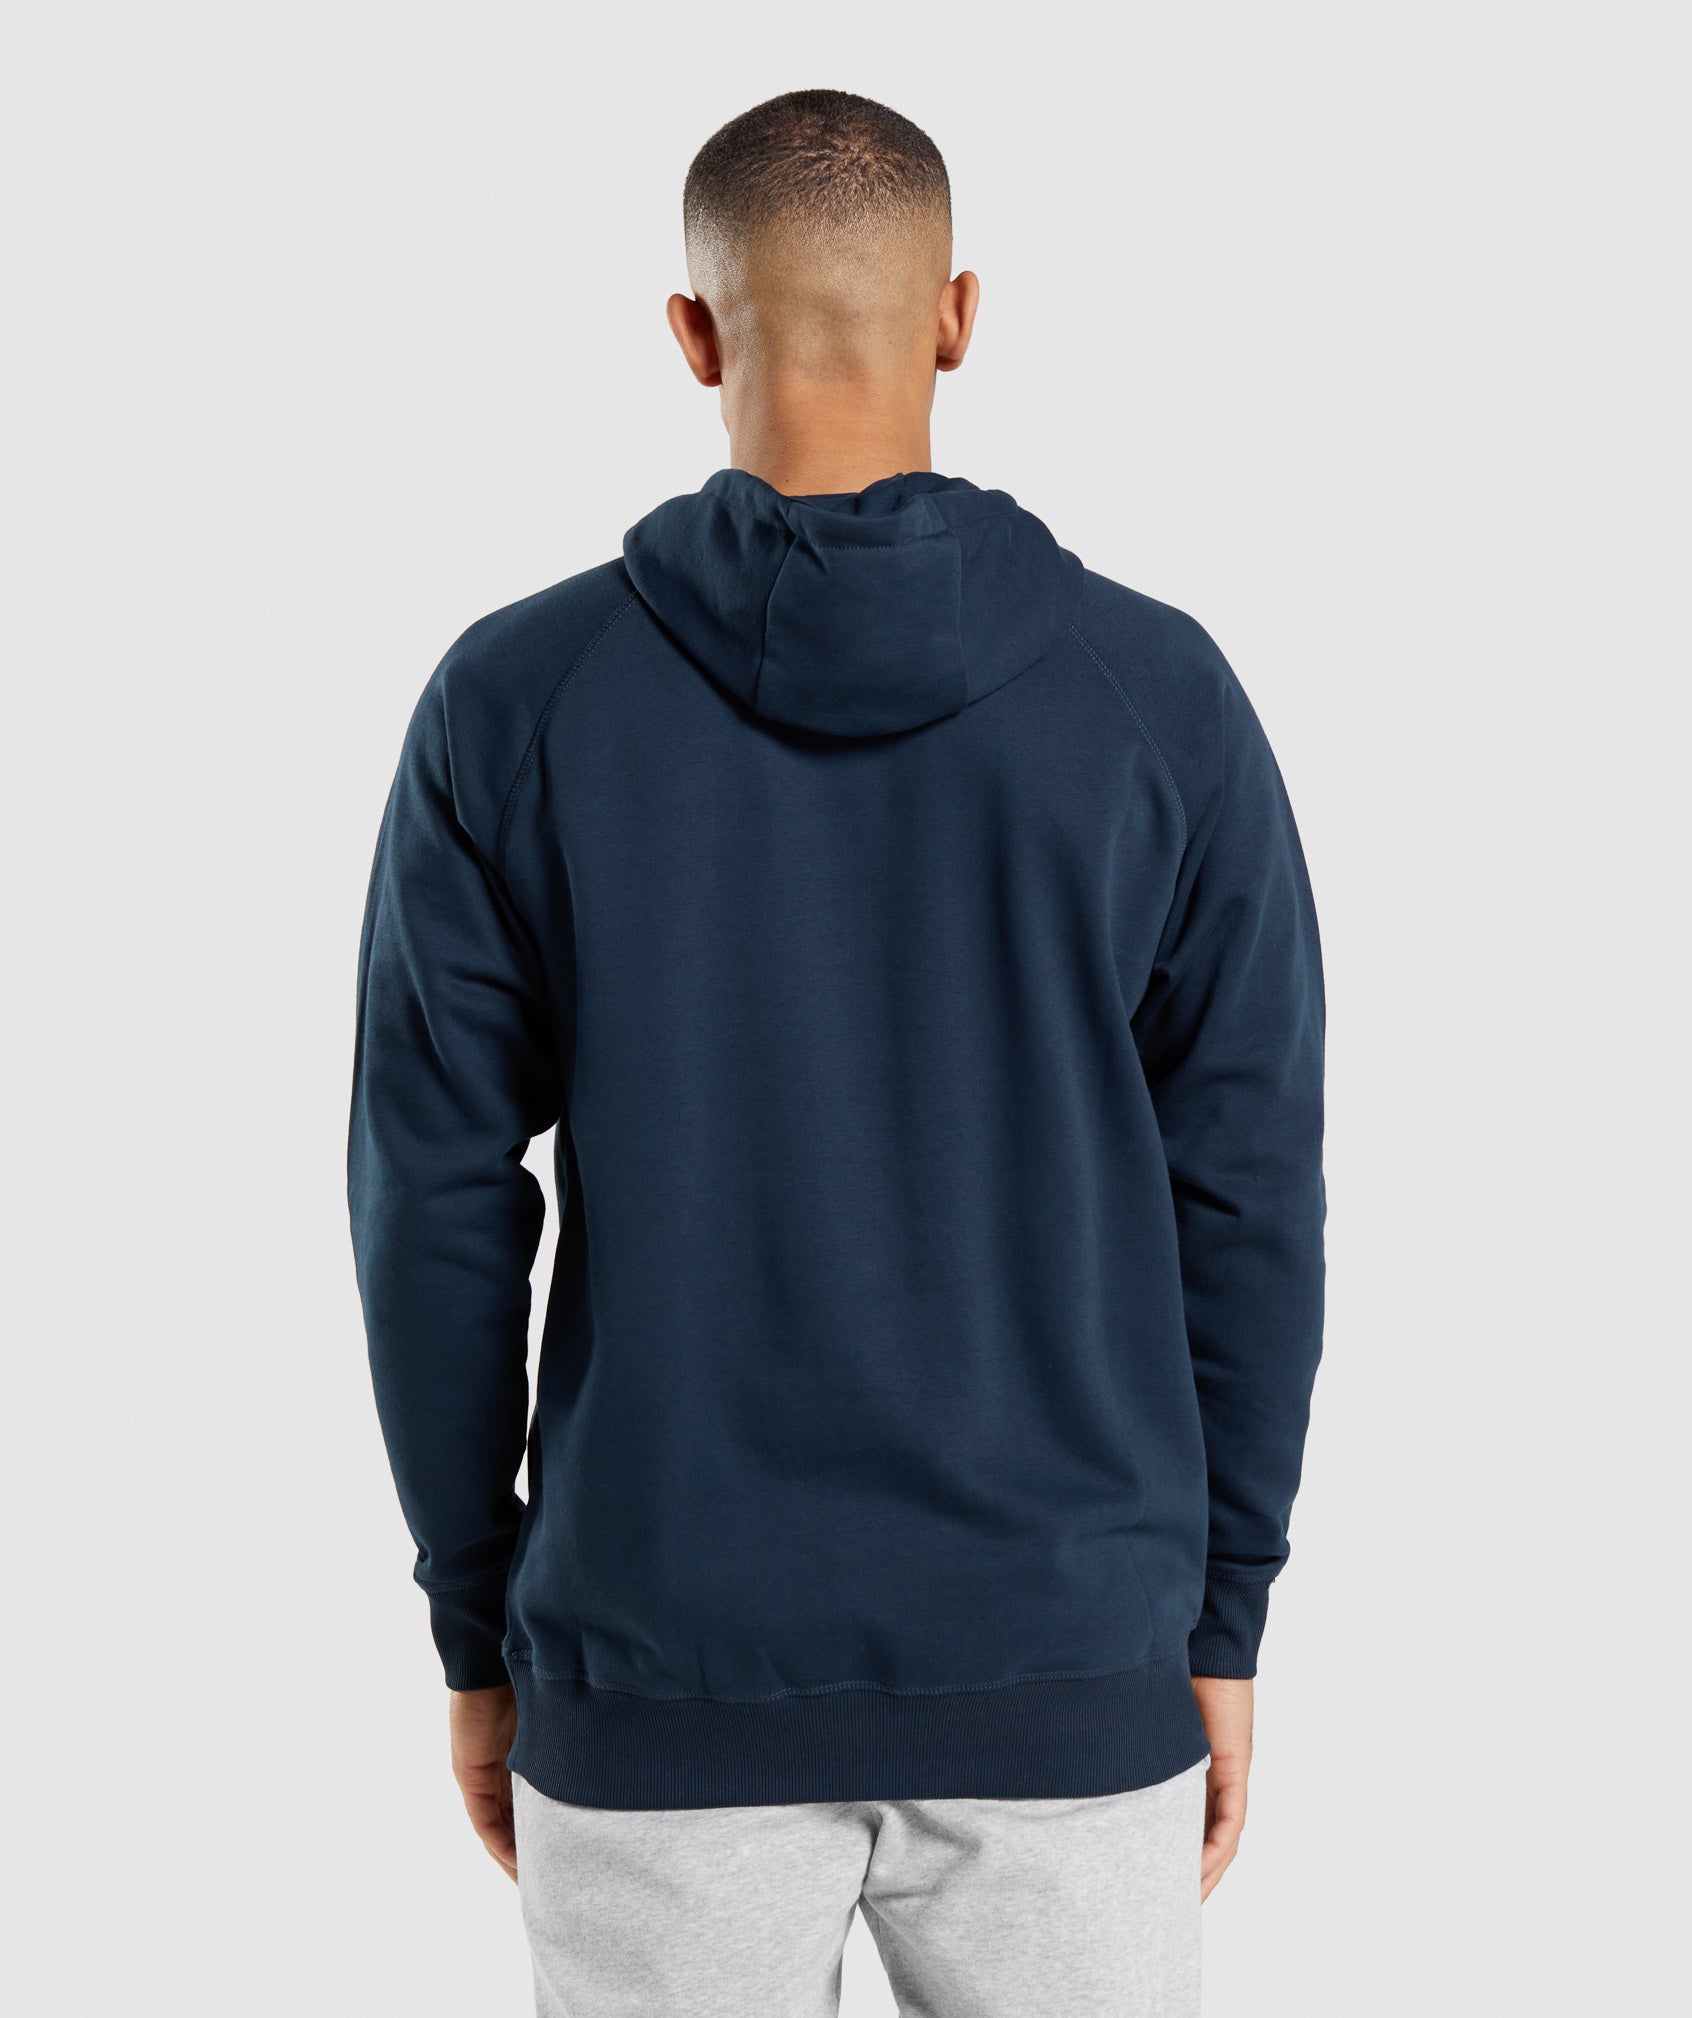 Apollo Hoodie in Navy - view 3